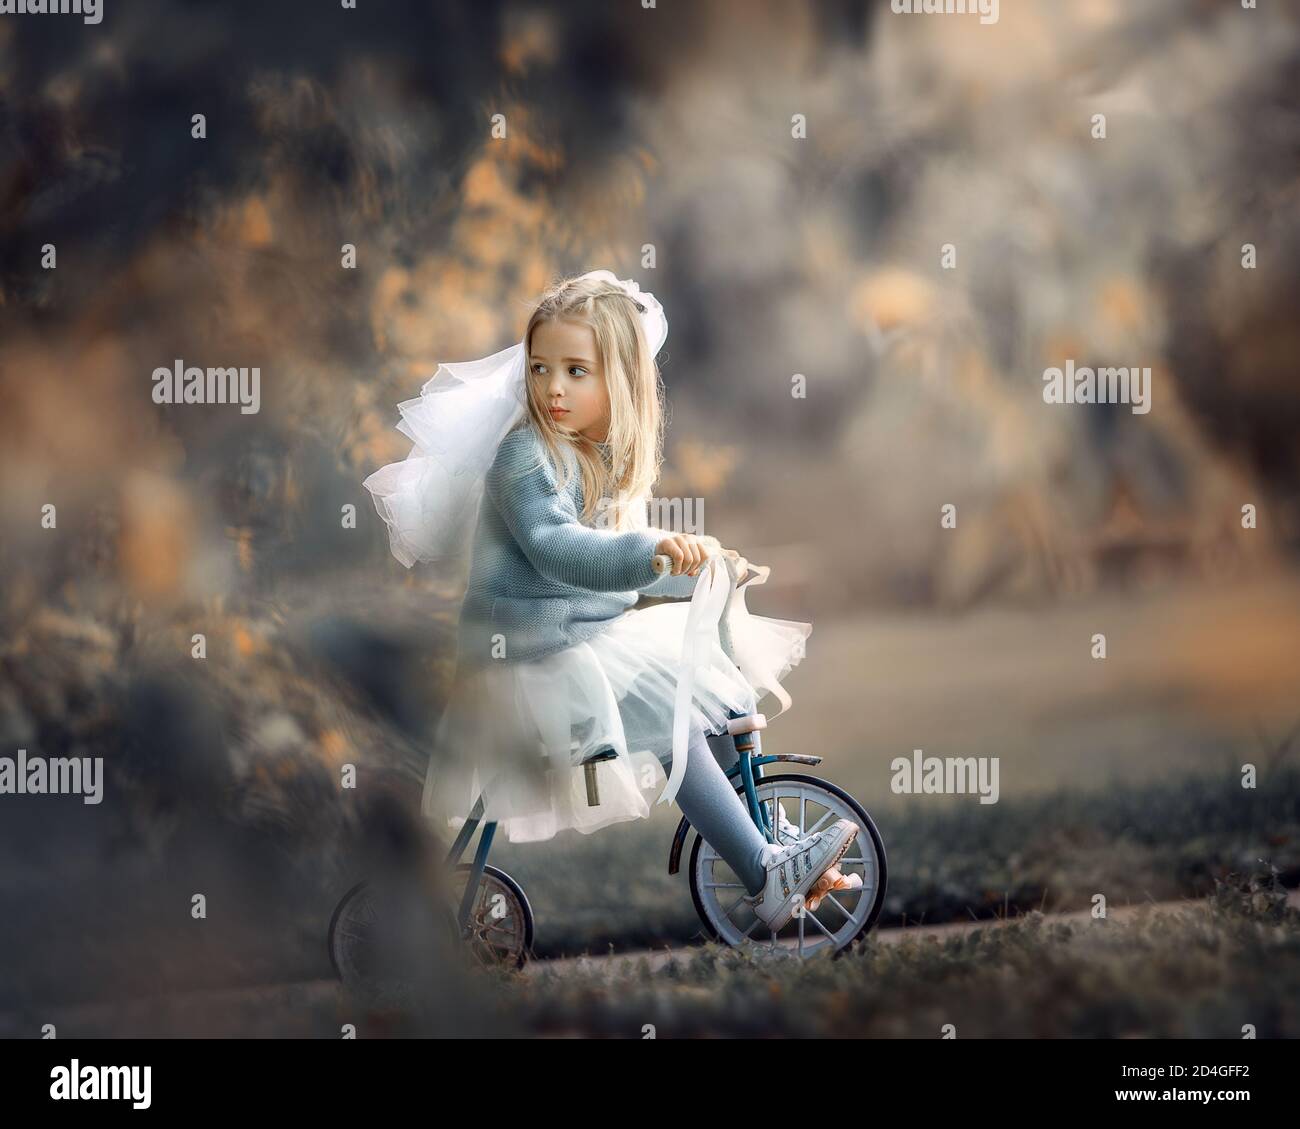 runaway Bride, girl in a veil and bridal suit rides a bicycle Stock Photo